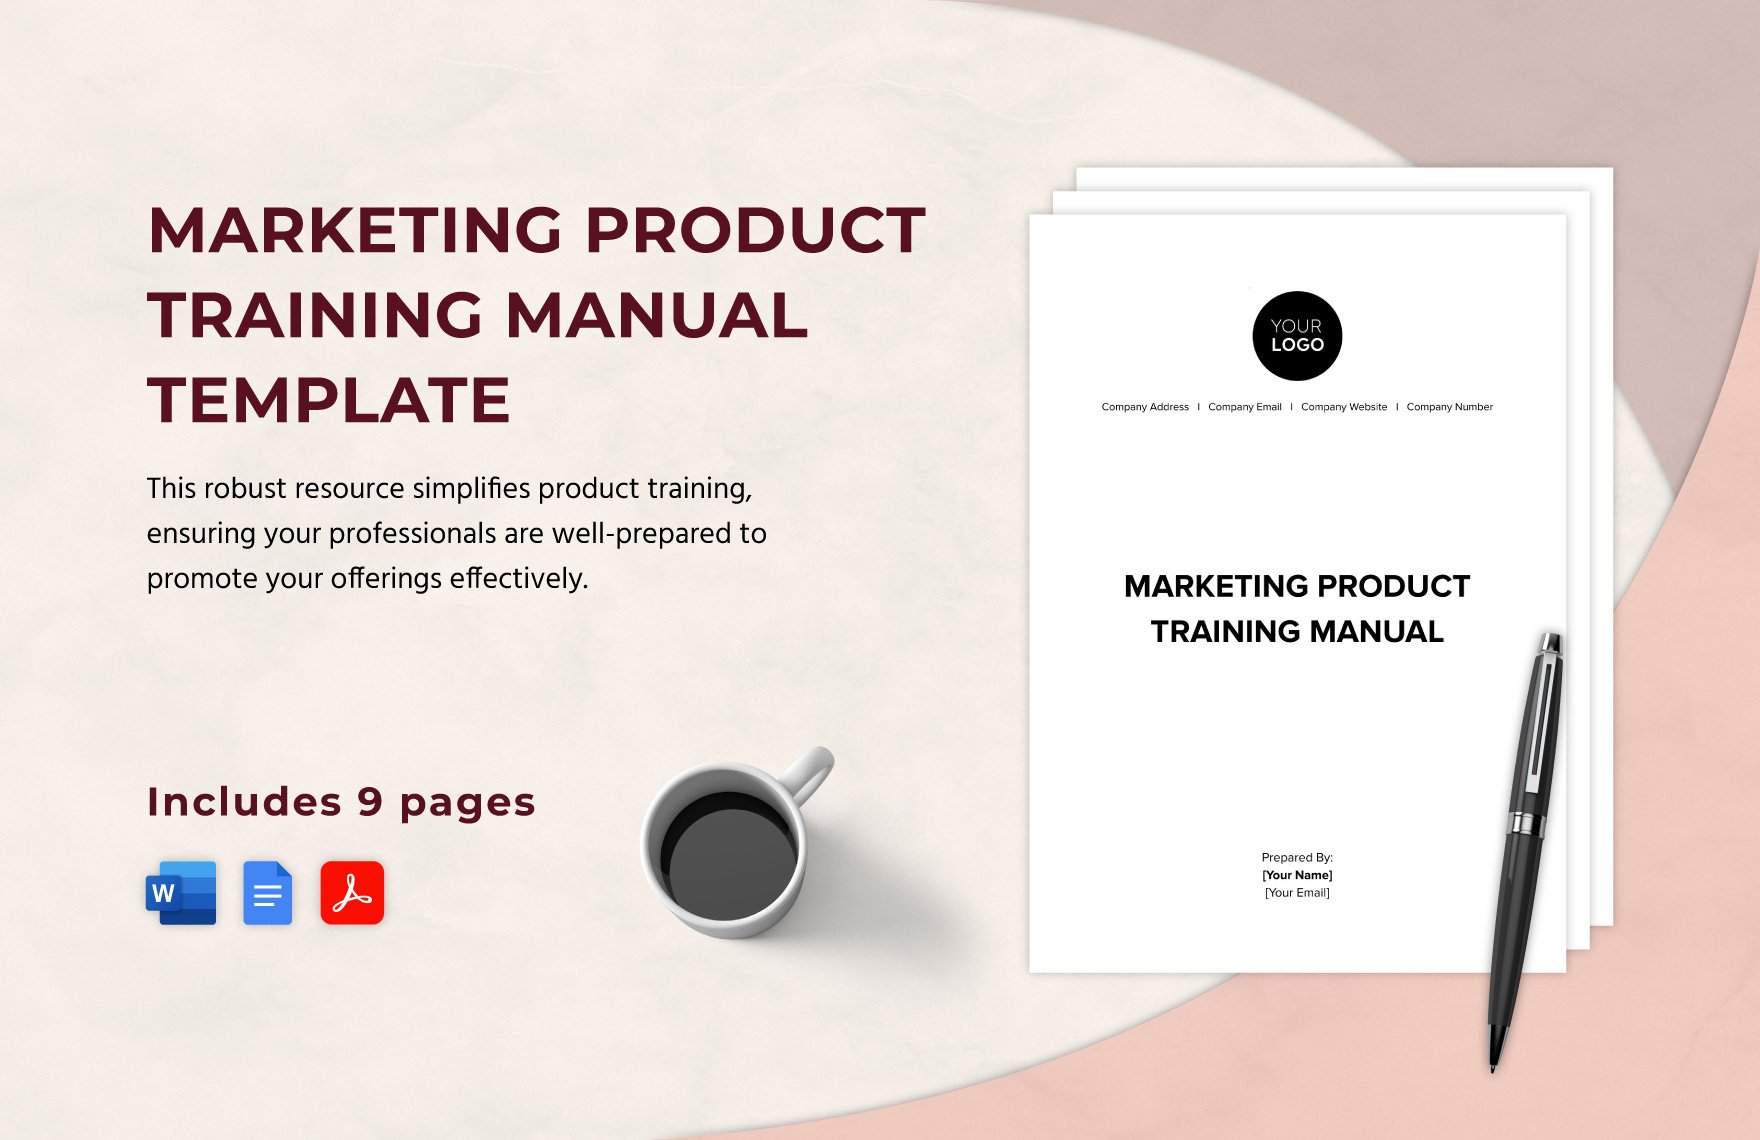 Marketing Product Training Manual Template in Word, Google Docs, PDF